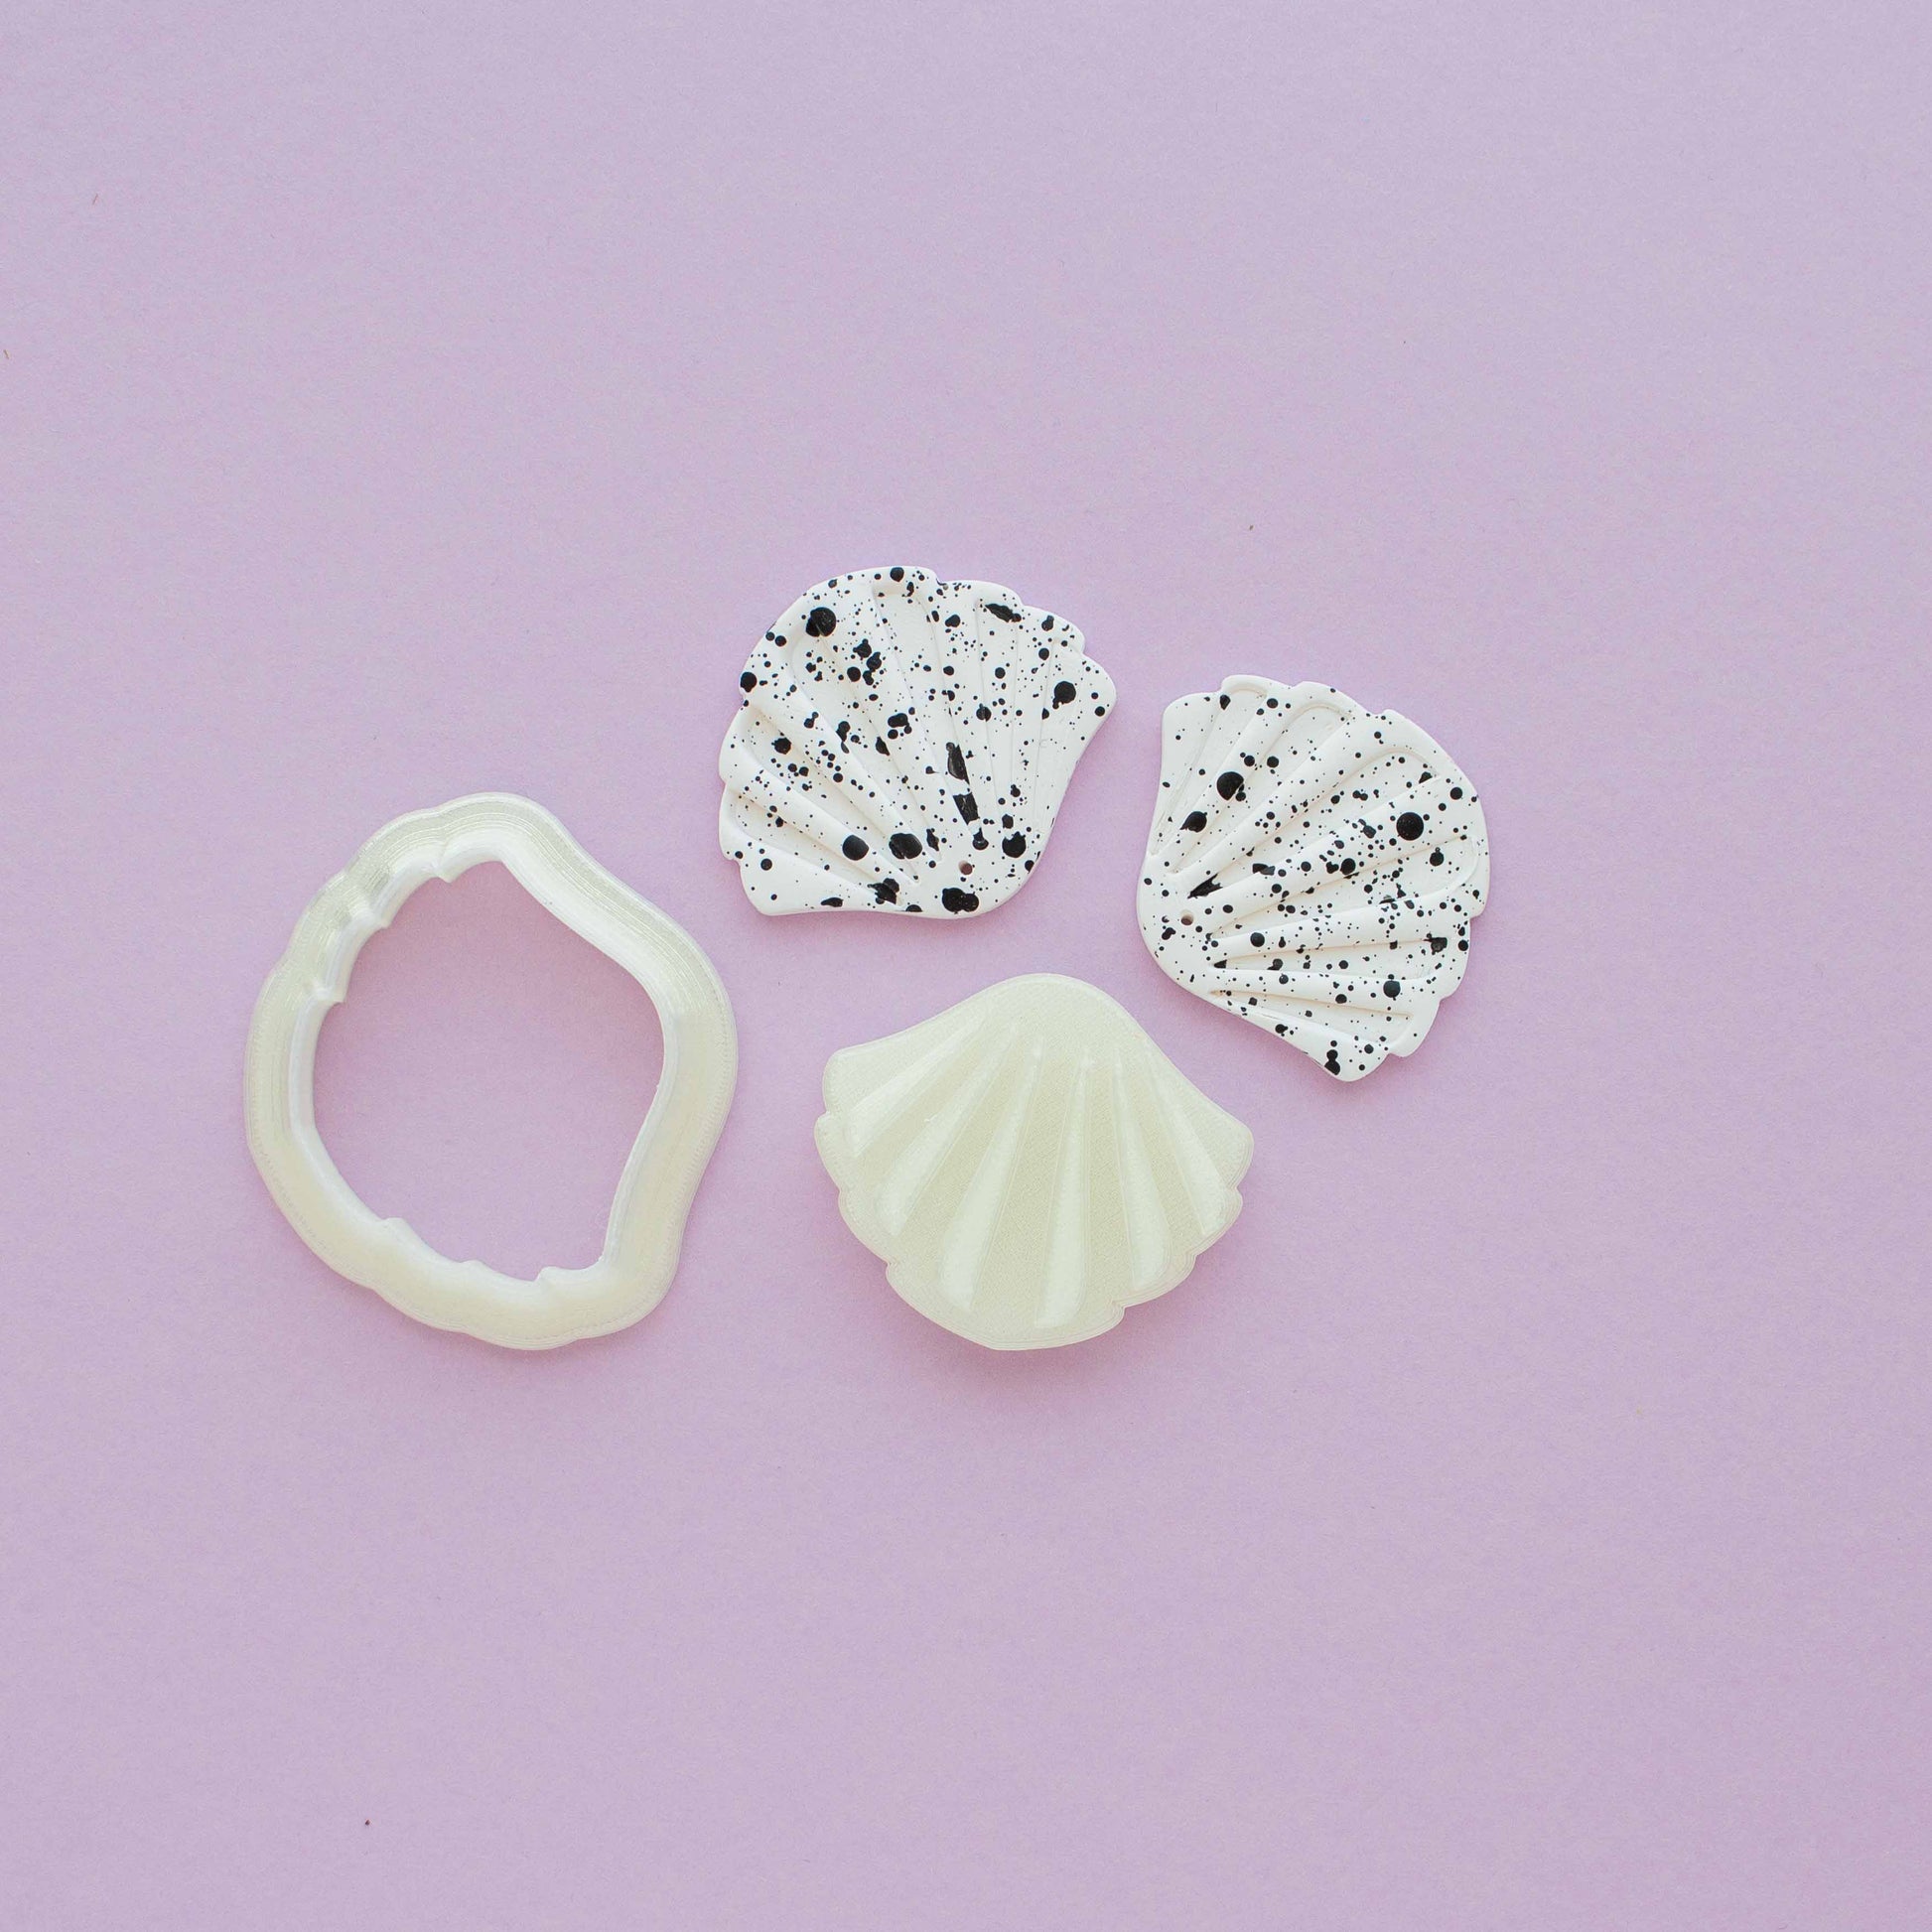 2 shell shaped drop polymer earrings and polymer clay cutters